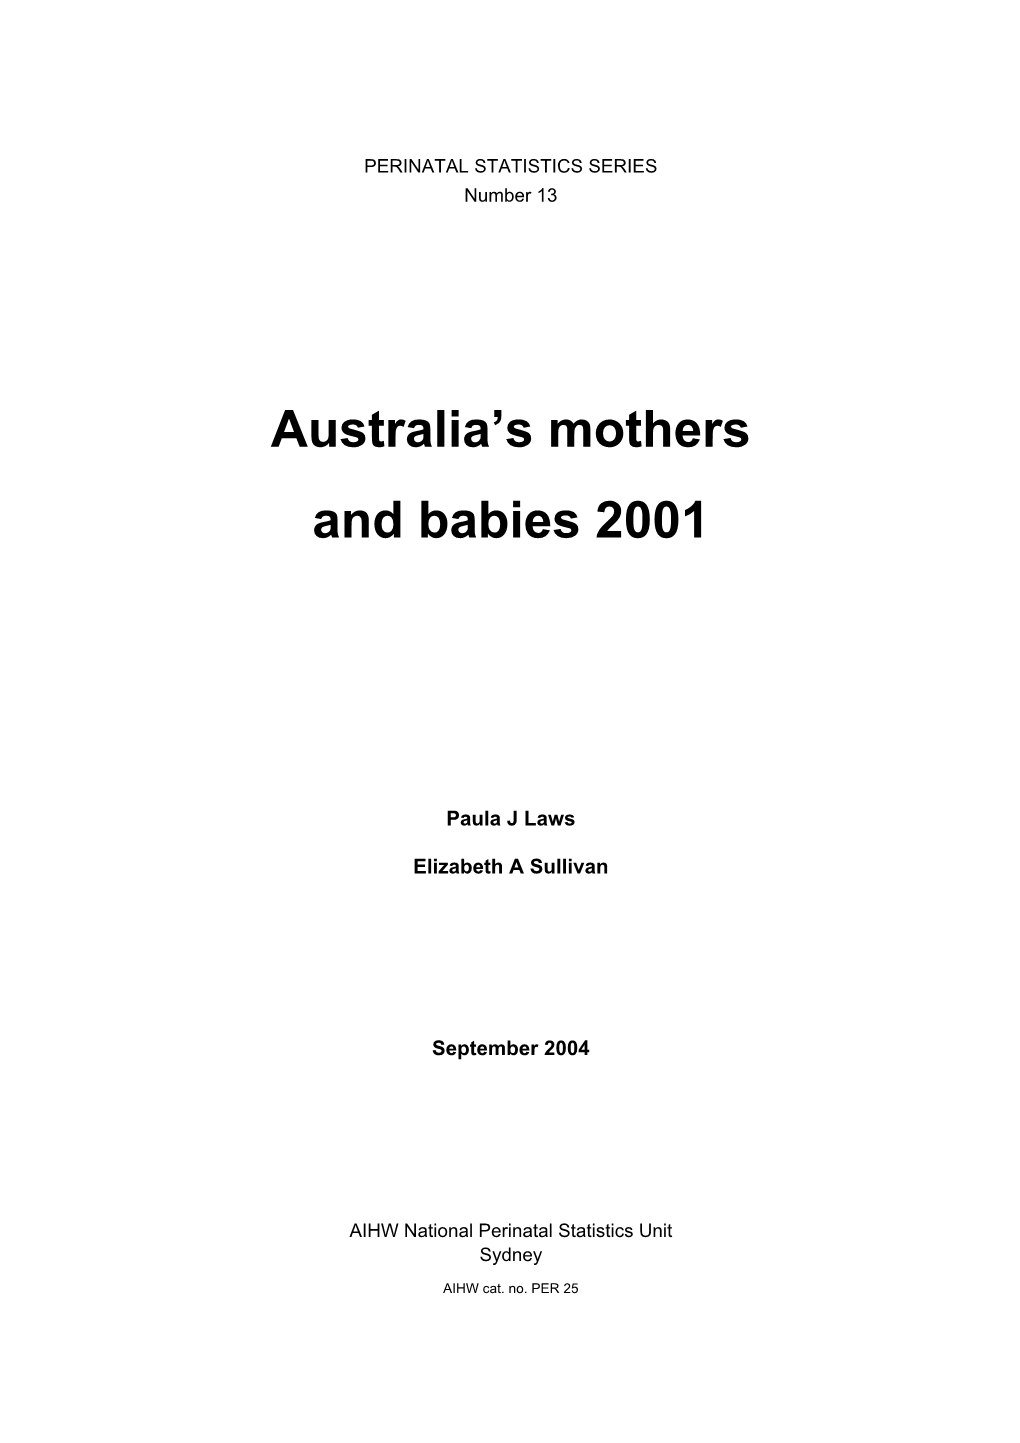 Australia's Mothers and Babies 2001